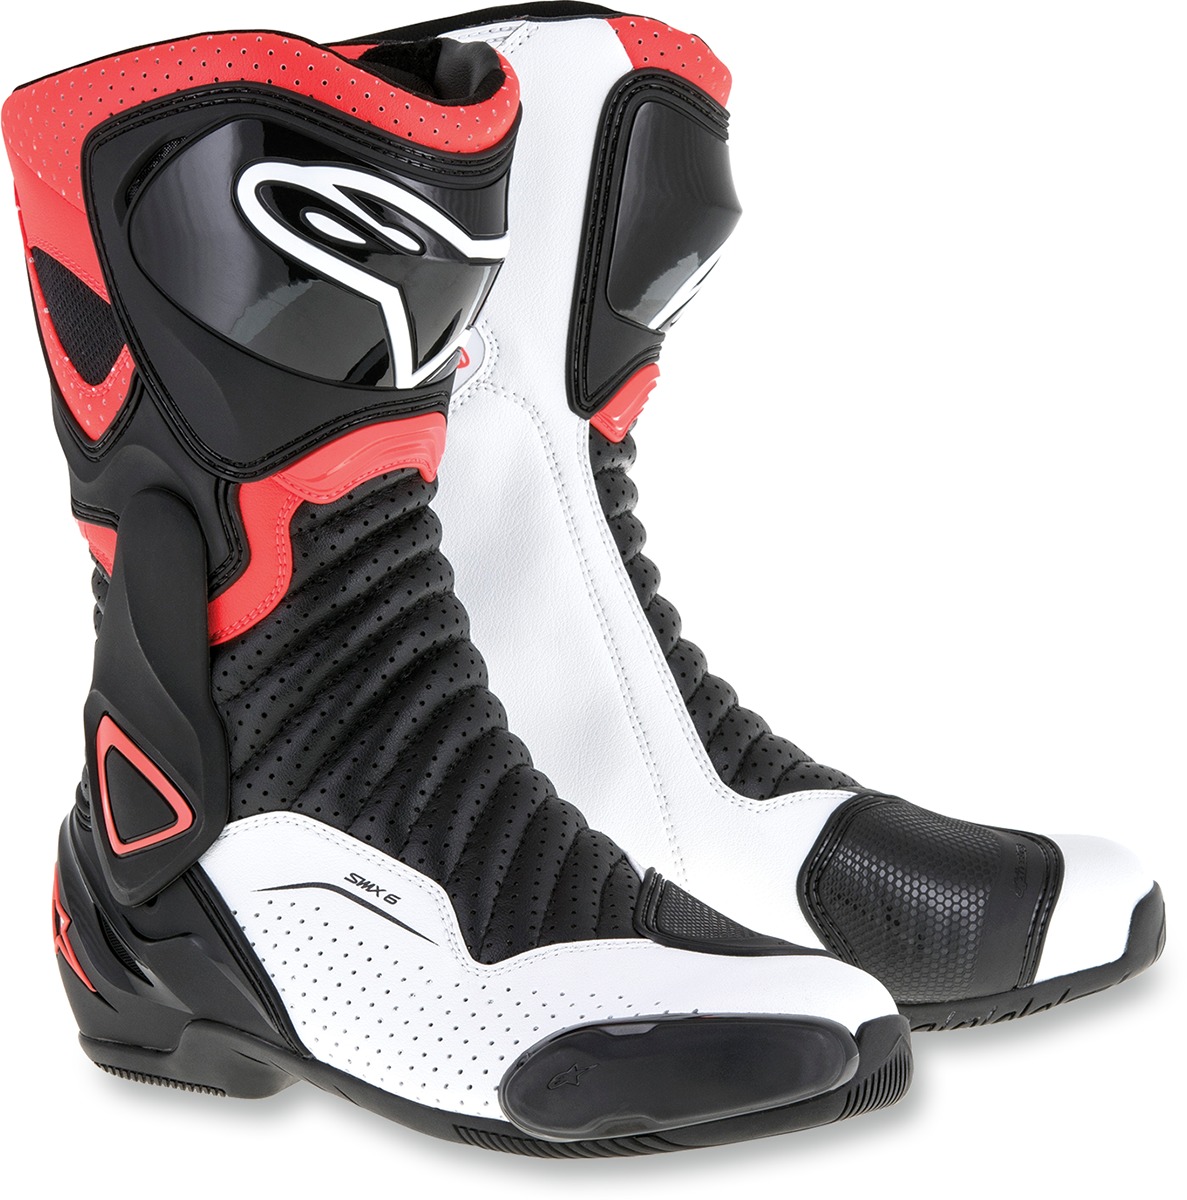 SMX-6v2 Vented Street Riding Boots Black/Red/White US 6 - Click Image to Close